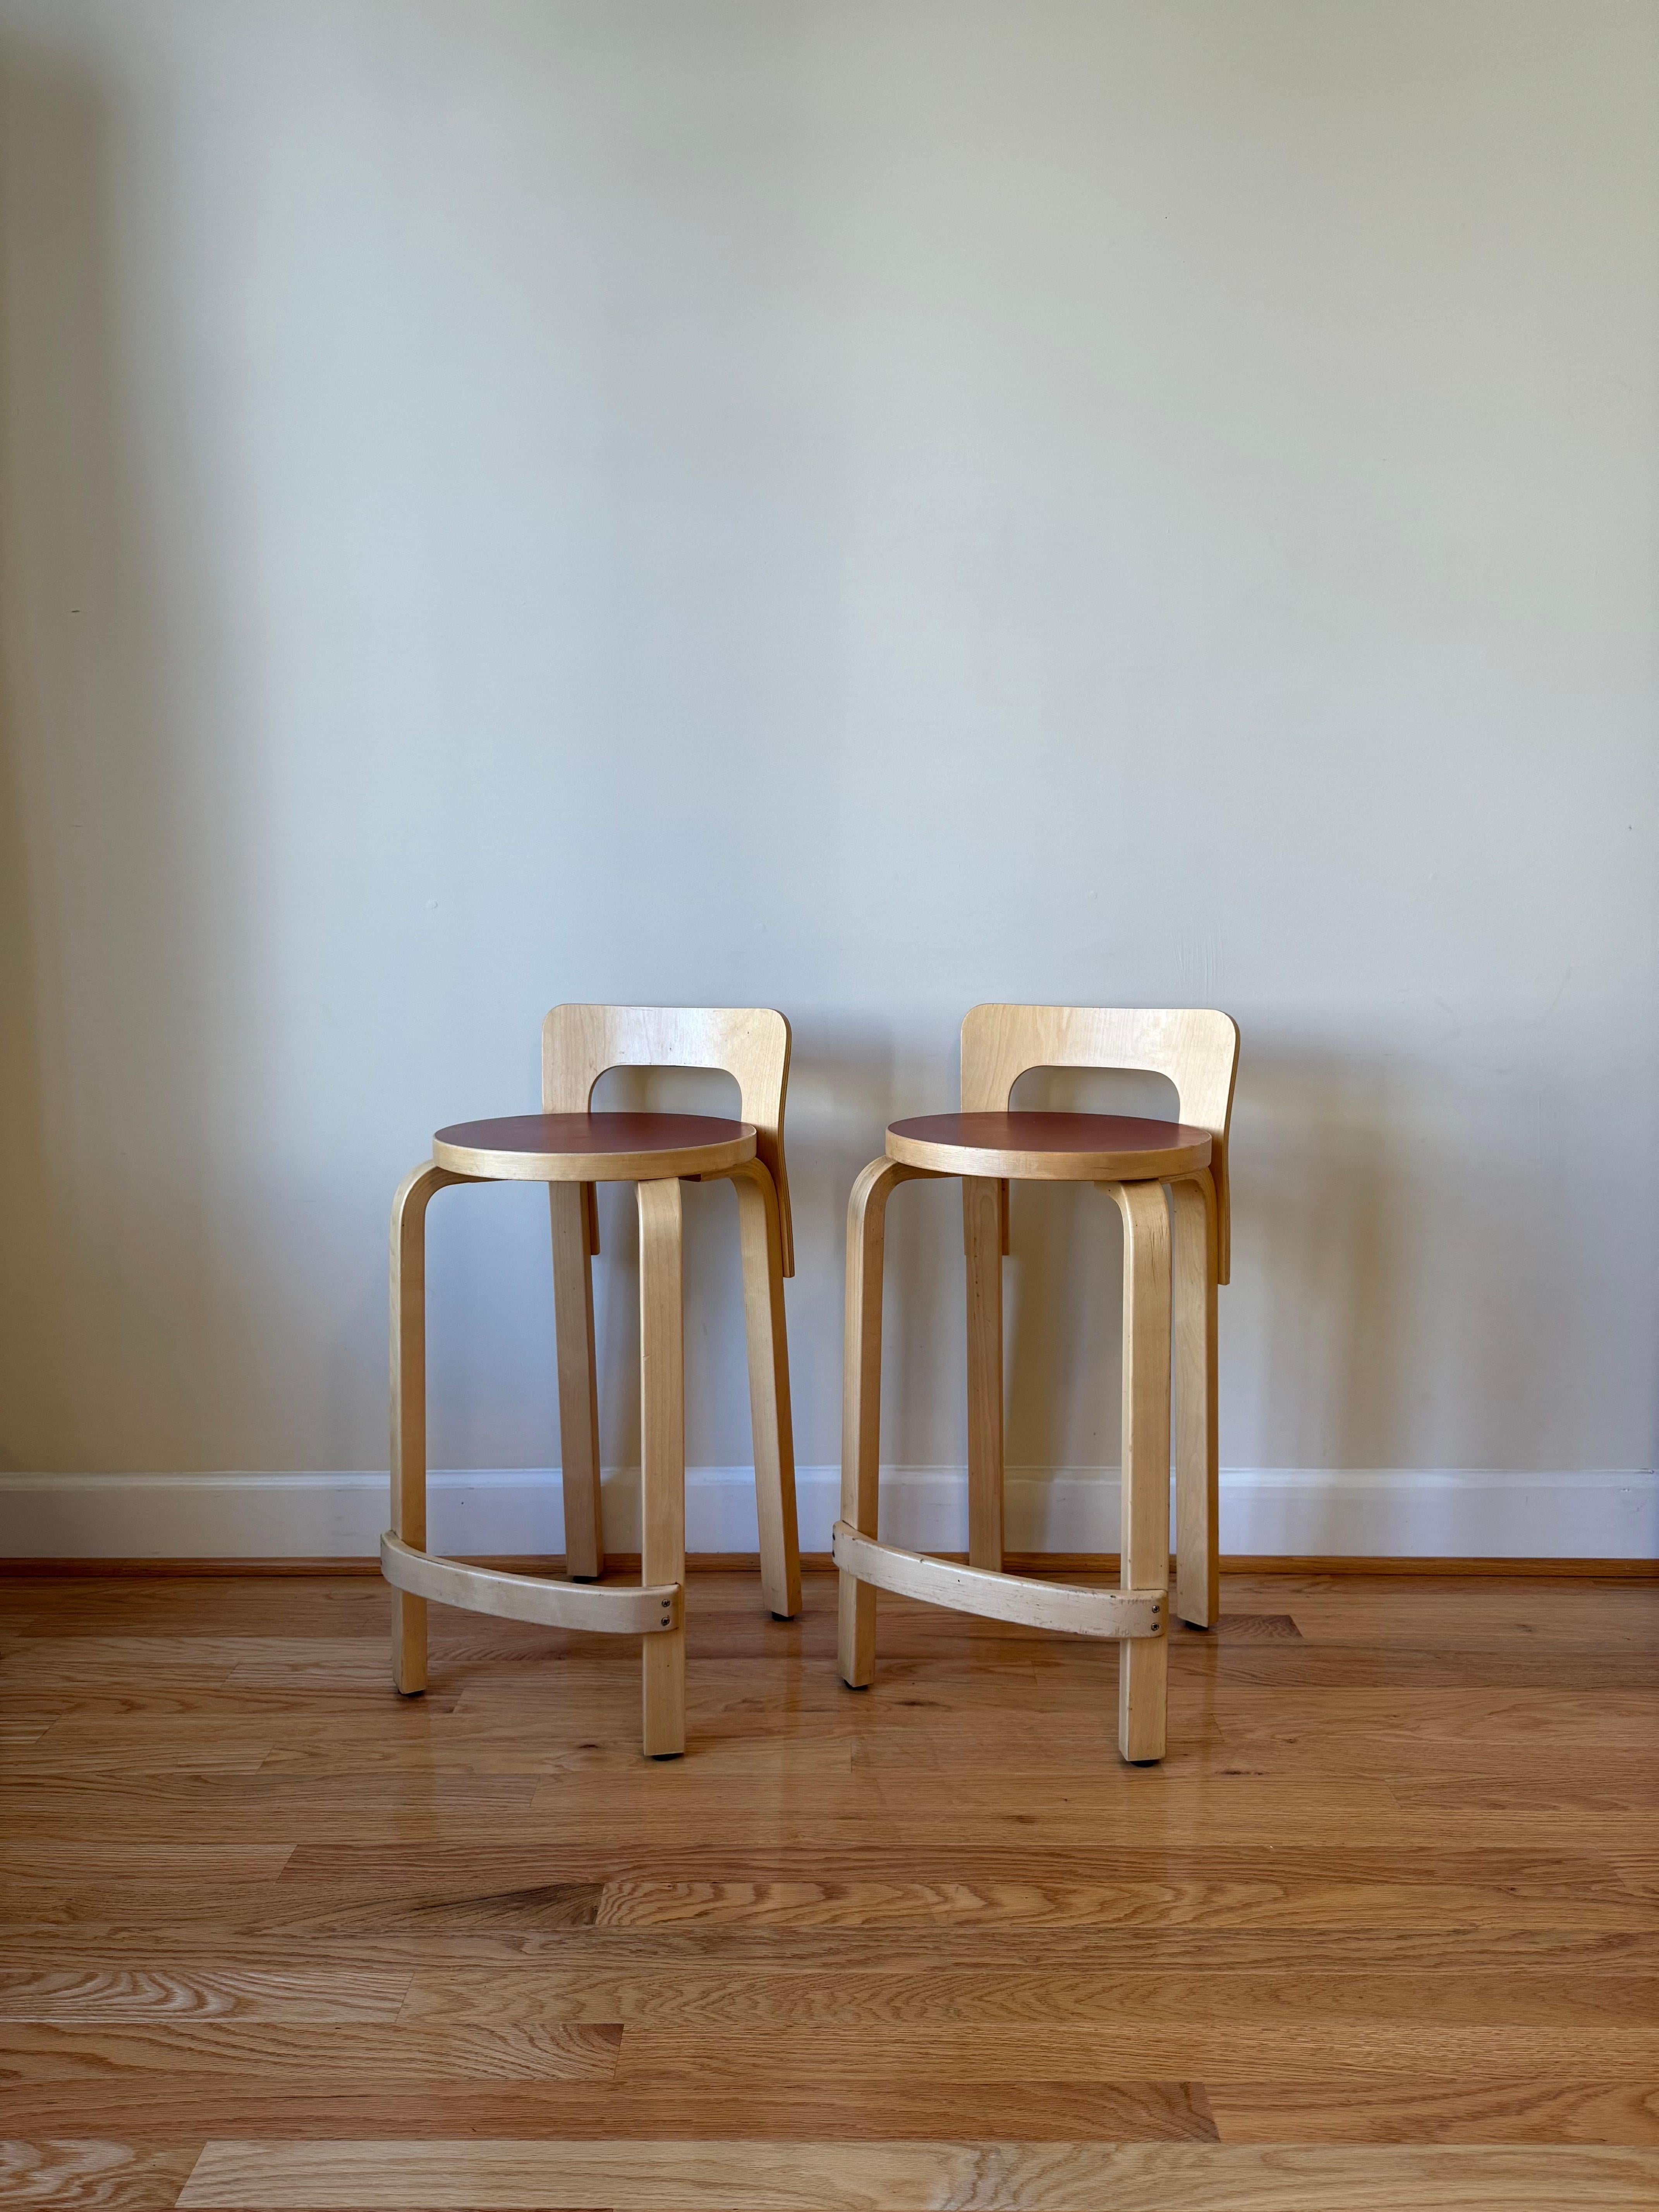 Alvar Aalto's long-legged High Chair K65 is the optimum height for high-top tables and bar counters. Its low seat back offers just the right amount of back support, and its curved rail serves as the perfect foot rest. 
Part of the L-leg collection